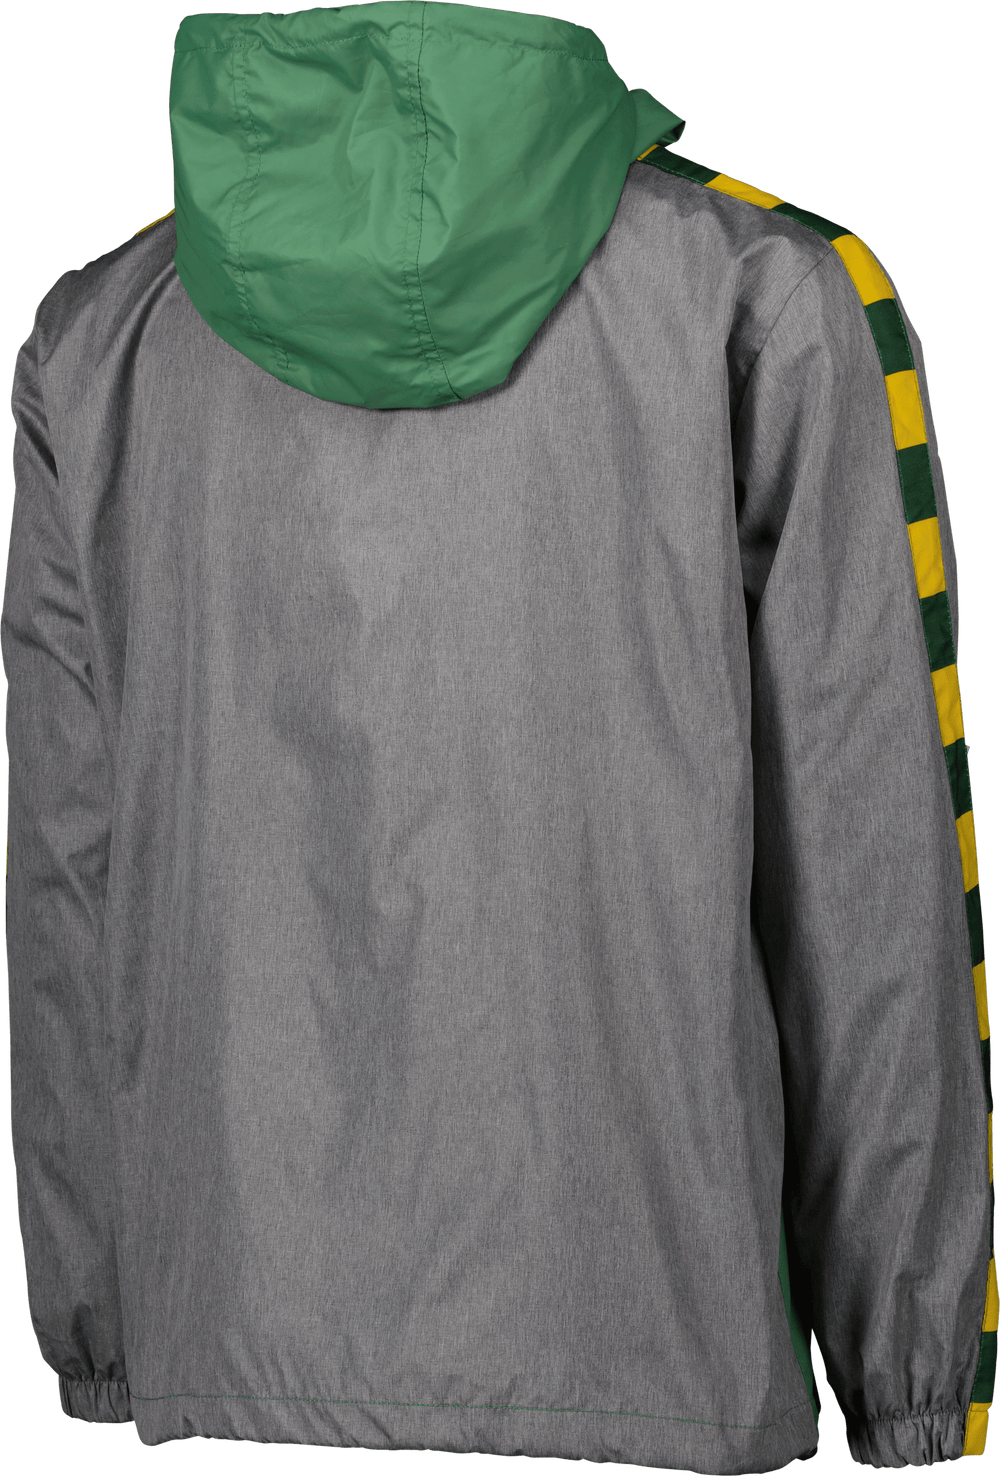 ROWDIES MEN'S GREY AND GREEN SPORT DESIGN SWEDEN HALF ZIP PULLOVER JACKET - The Bay Republic | Team Store of the Tampa Bay Rays & Rowdies